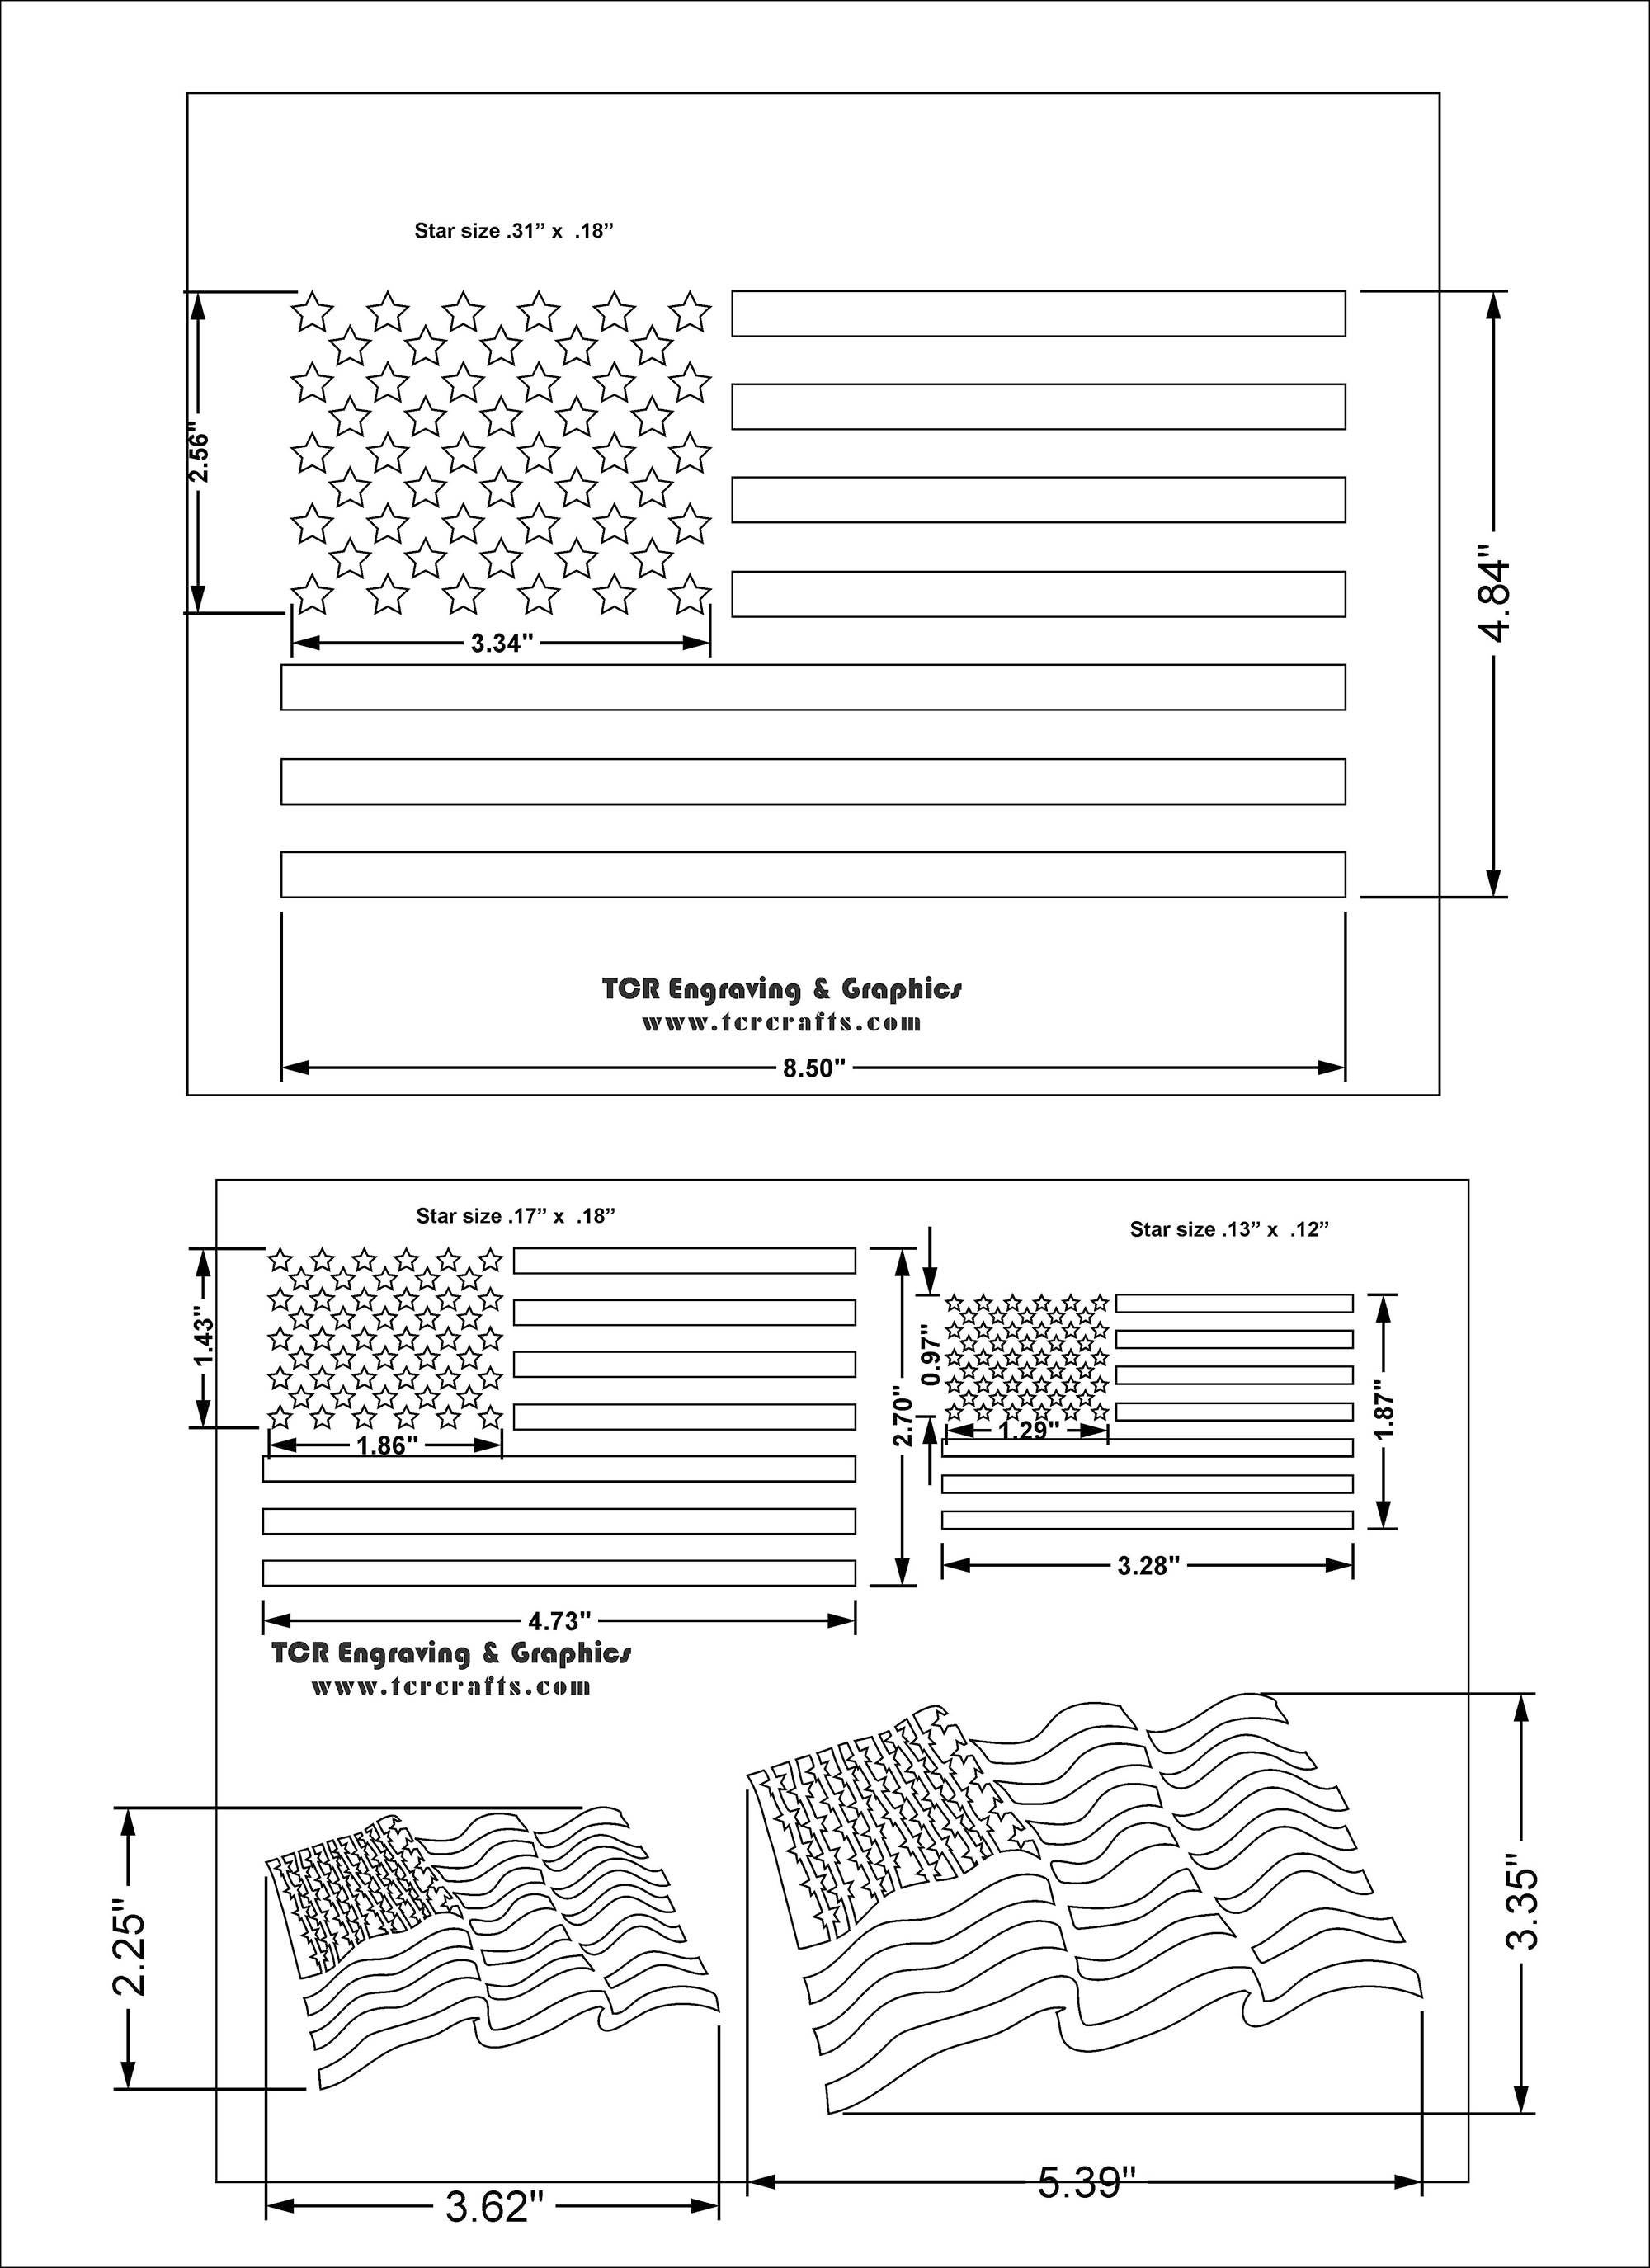 American Flag Stencil (2 Pack) - Makely